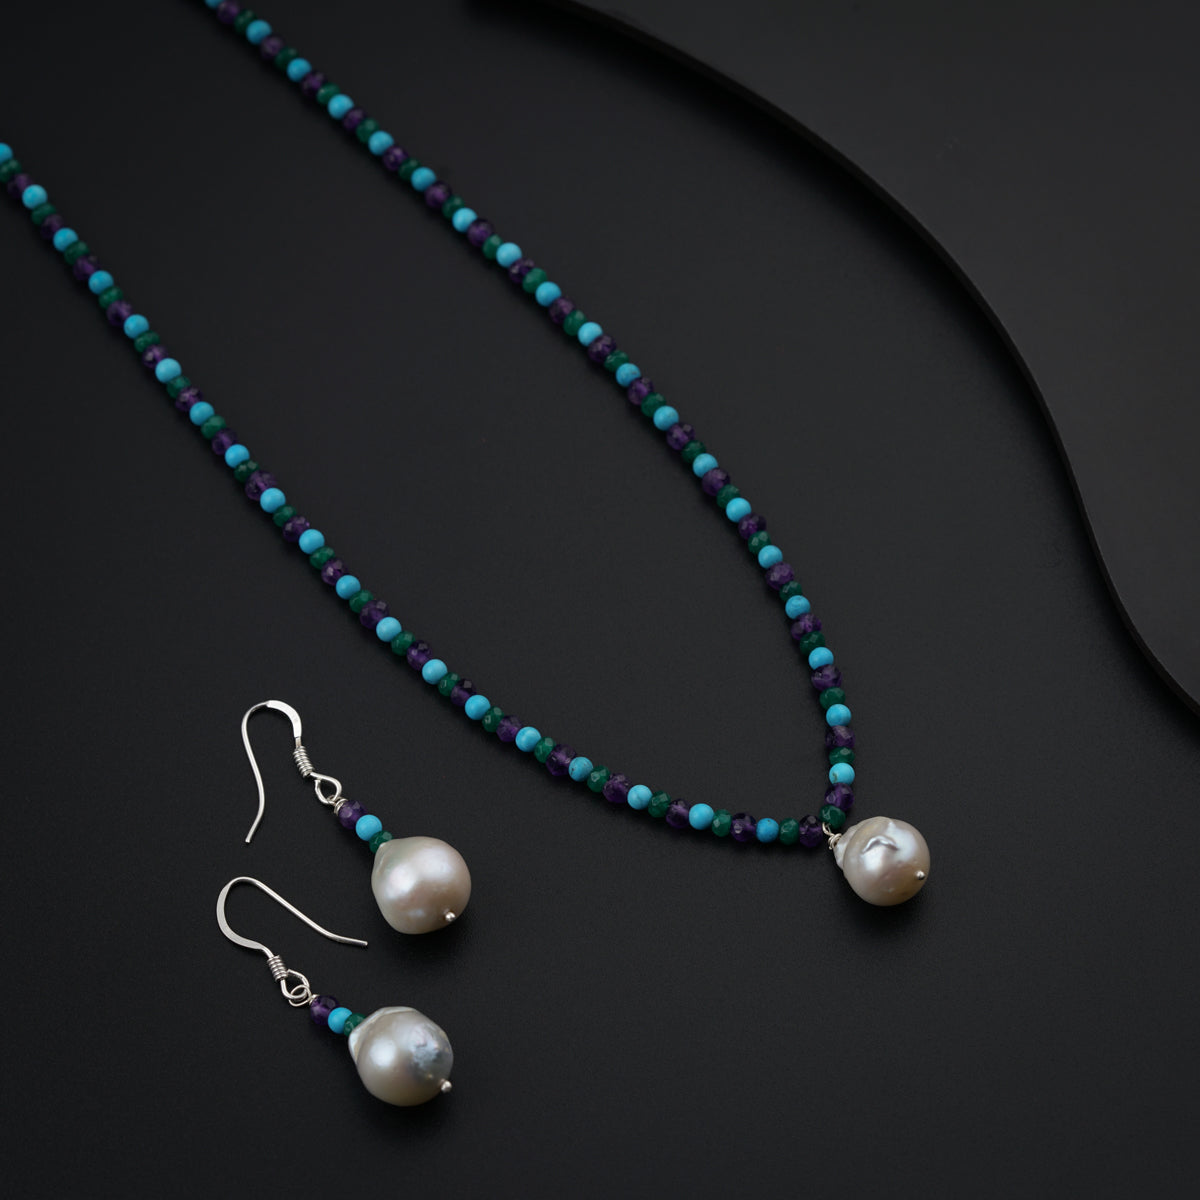 a necklace and earring set with pearls and turquoise beads